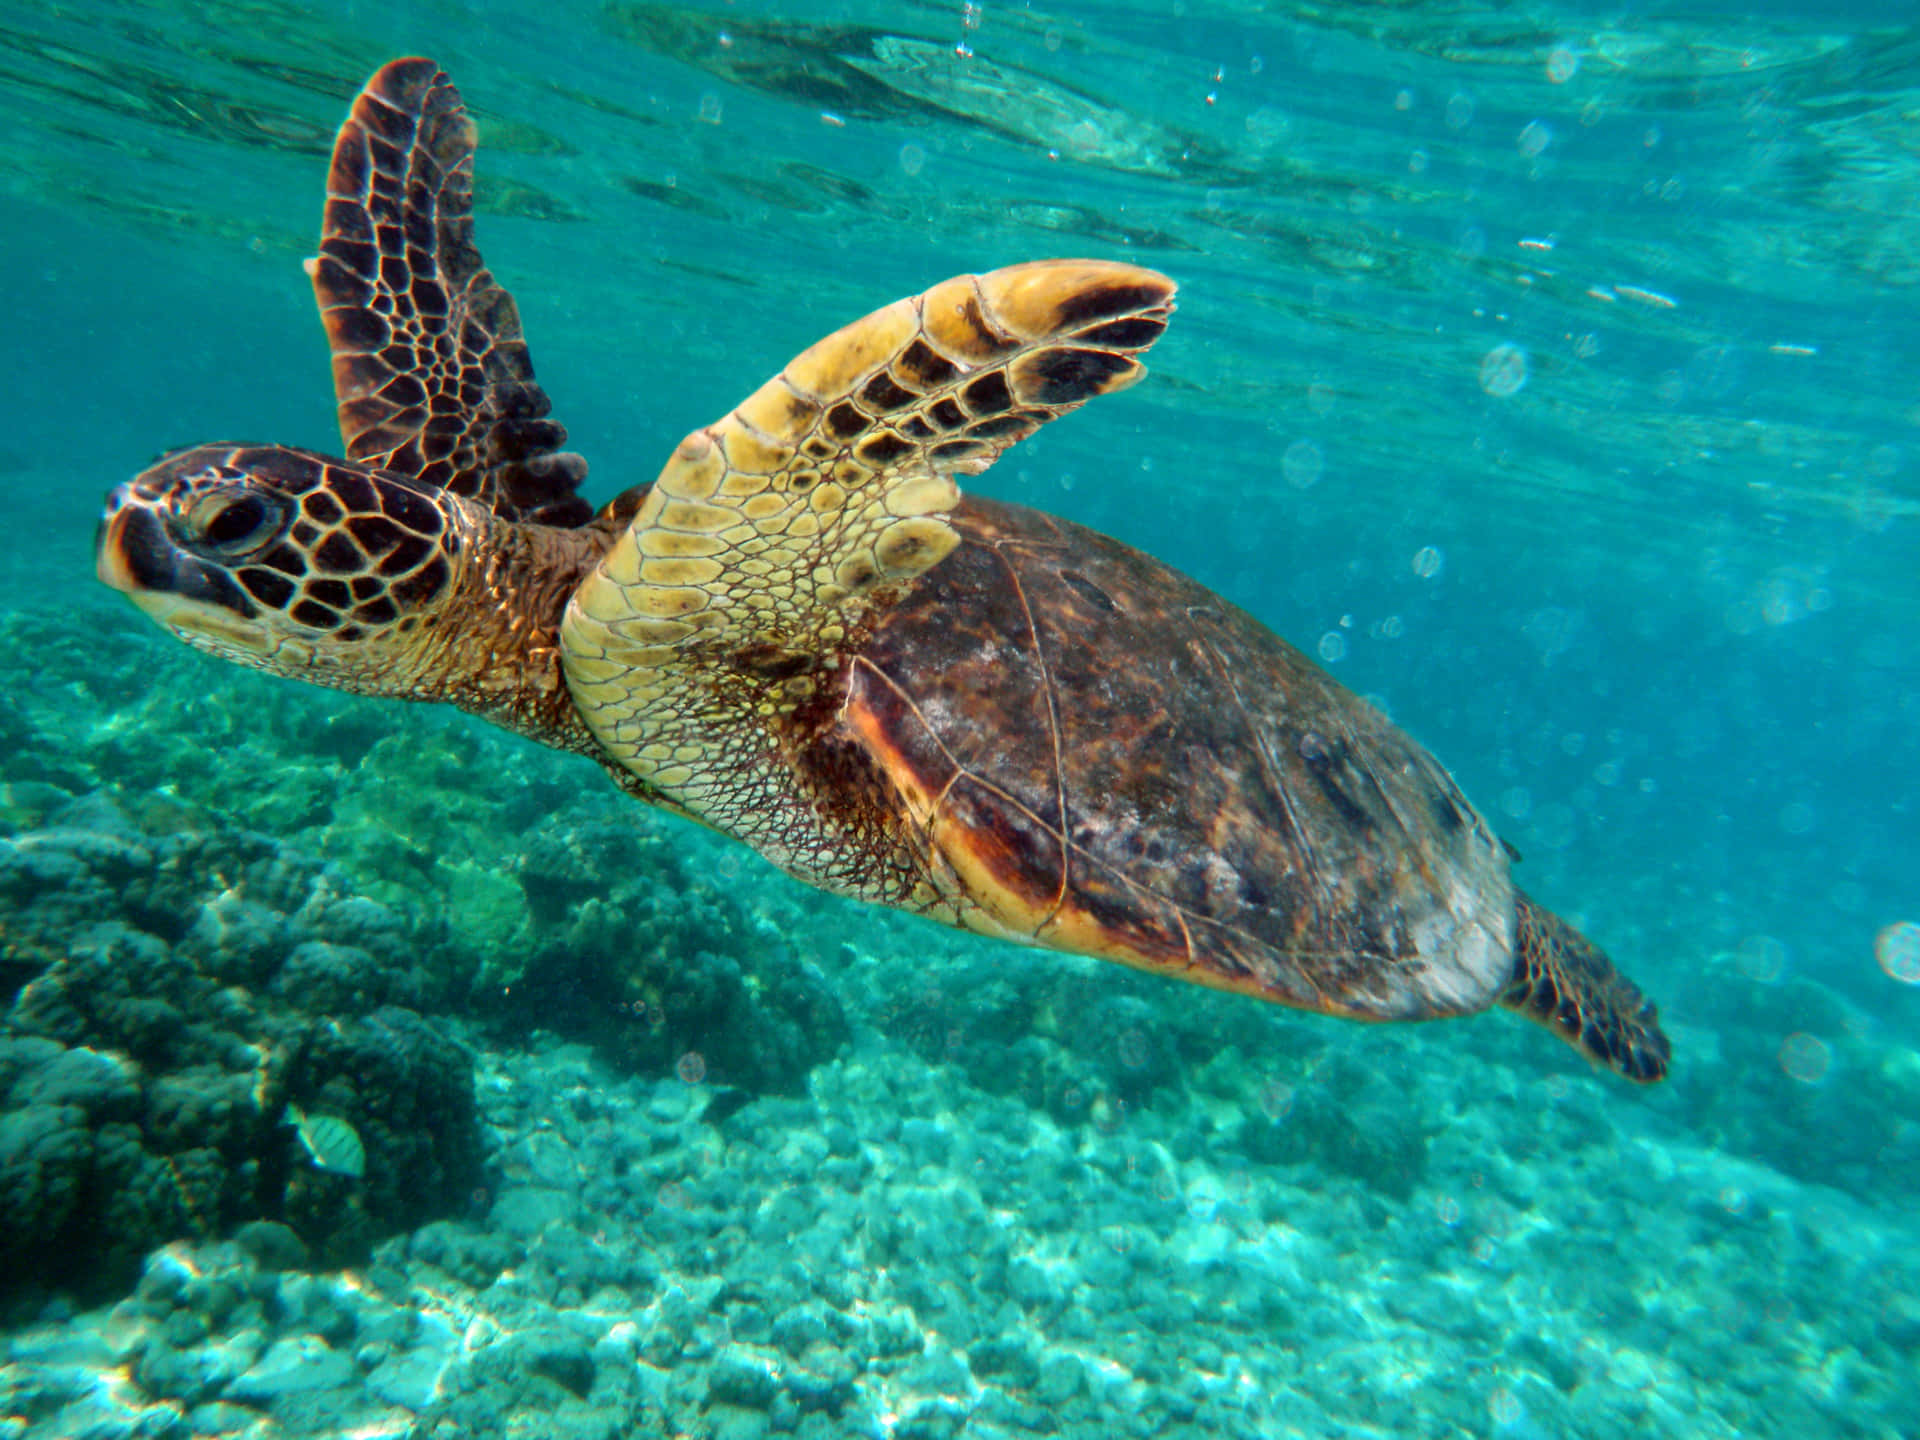 The beauty of a majestic sea turtle swimming in the Caribbean Sea.